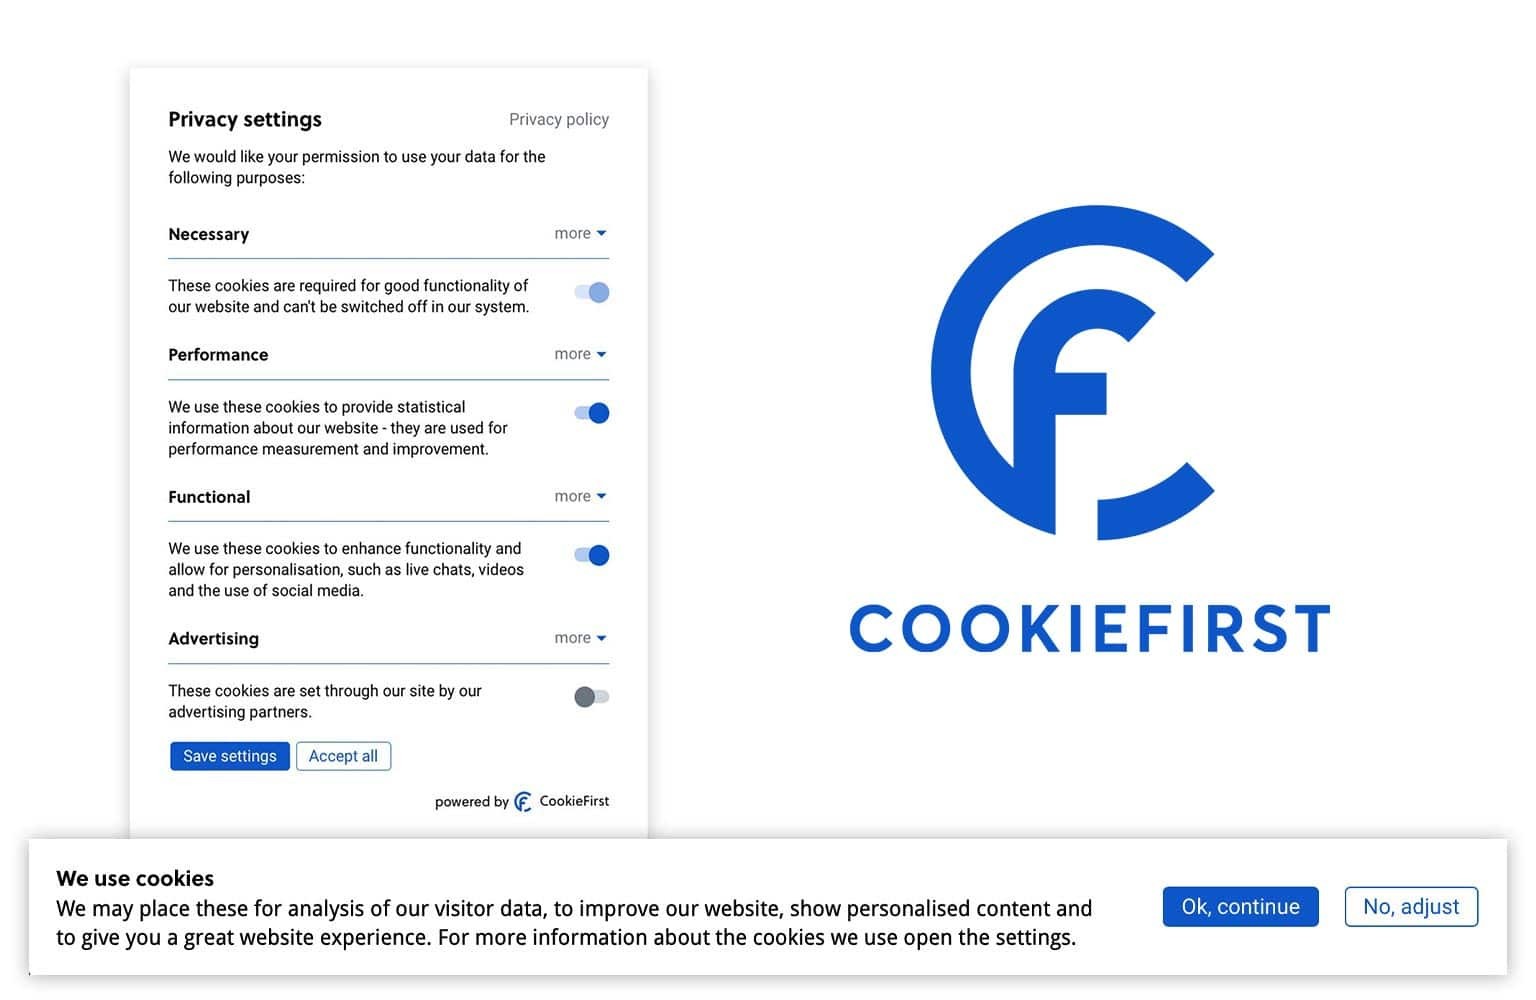 CMP Cookies | CookieFirs is a consent management platform for managing cookie consent